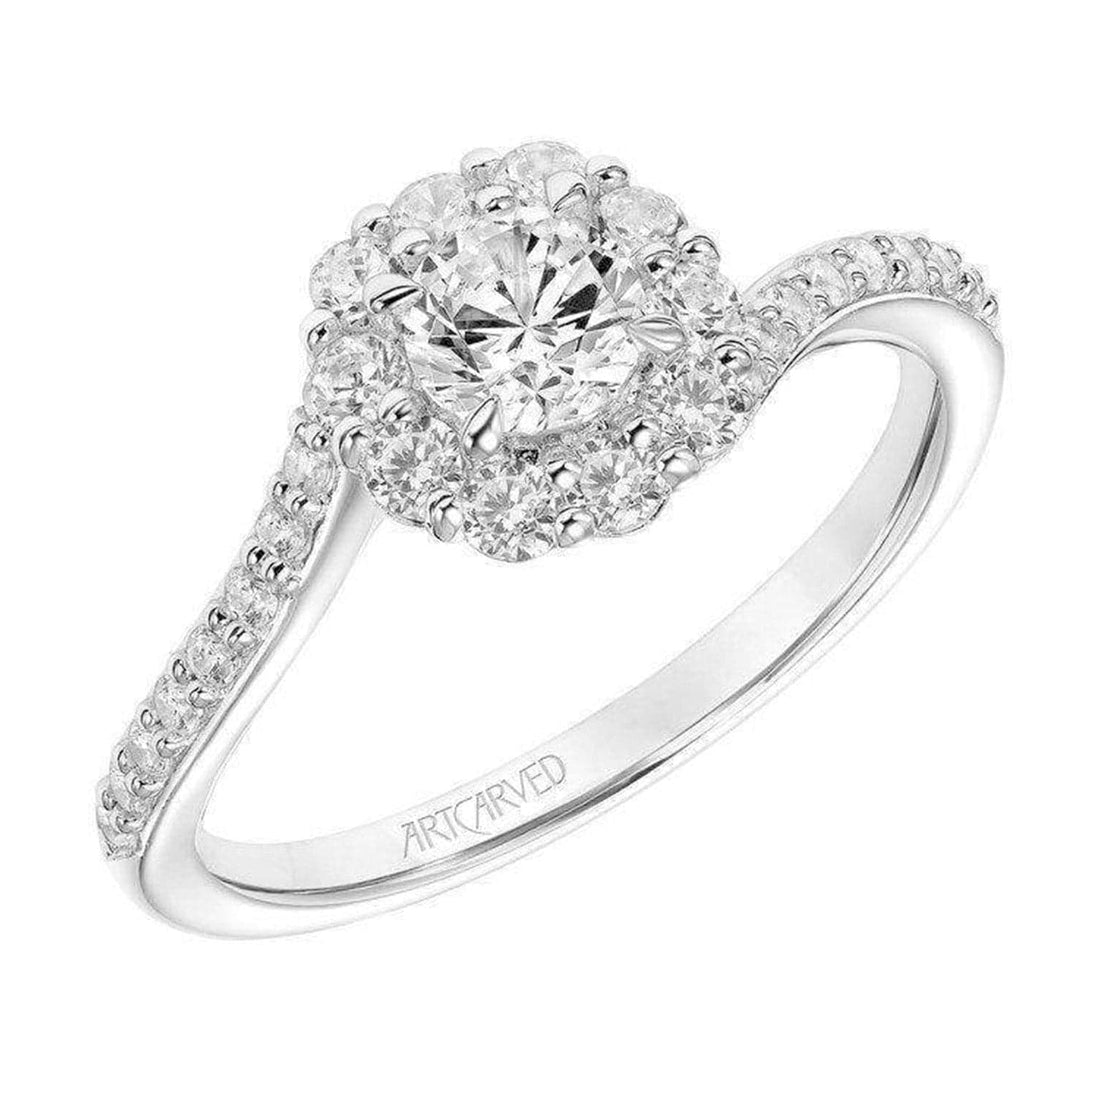 Halo-Accented Swirl Engagement Ring - Skeie's Jewelers